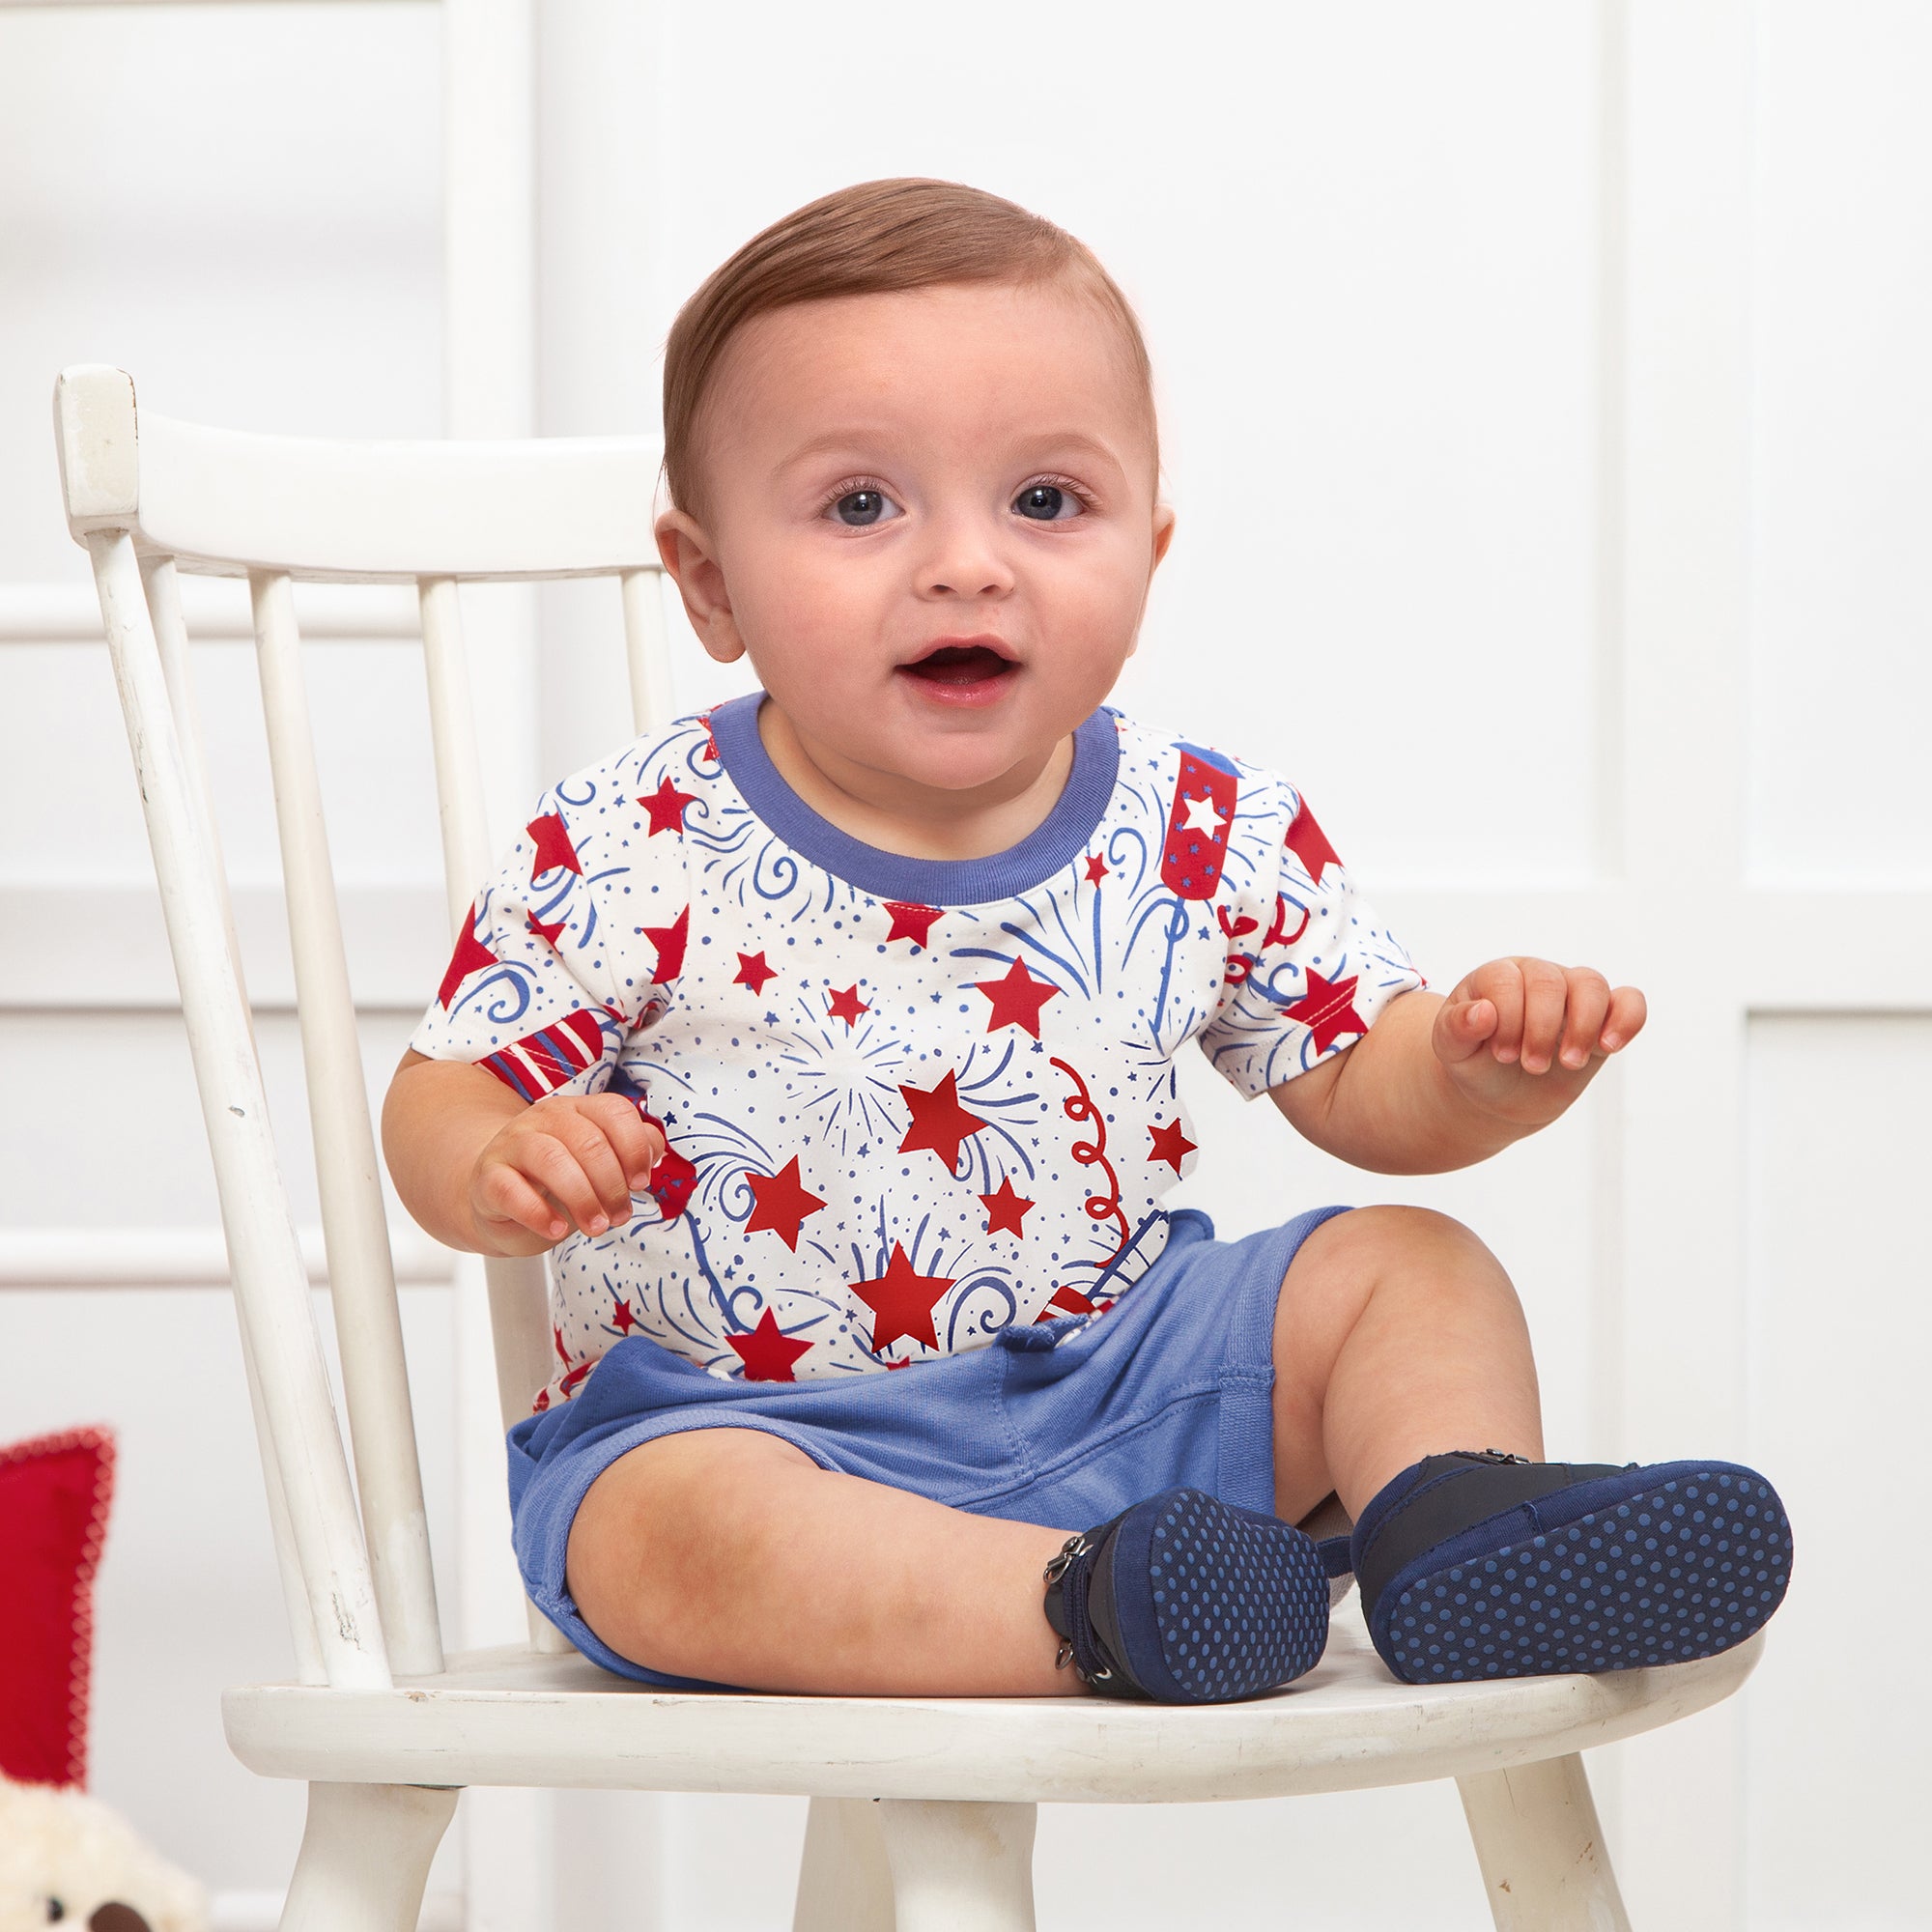 4th Of July Boy's Tee & Shorts